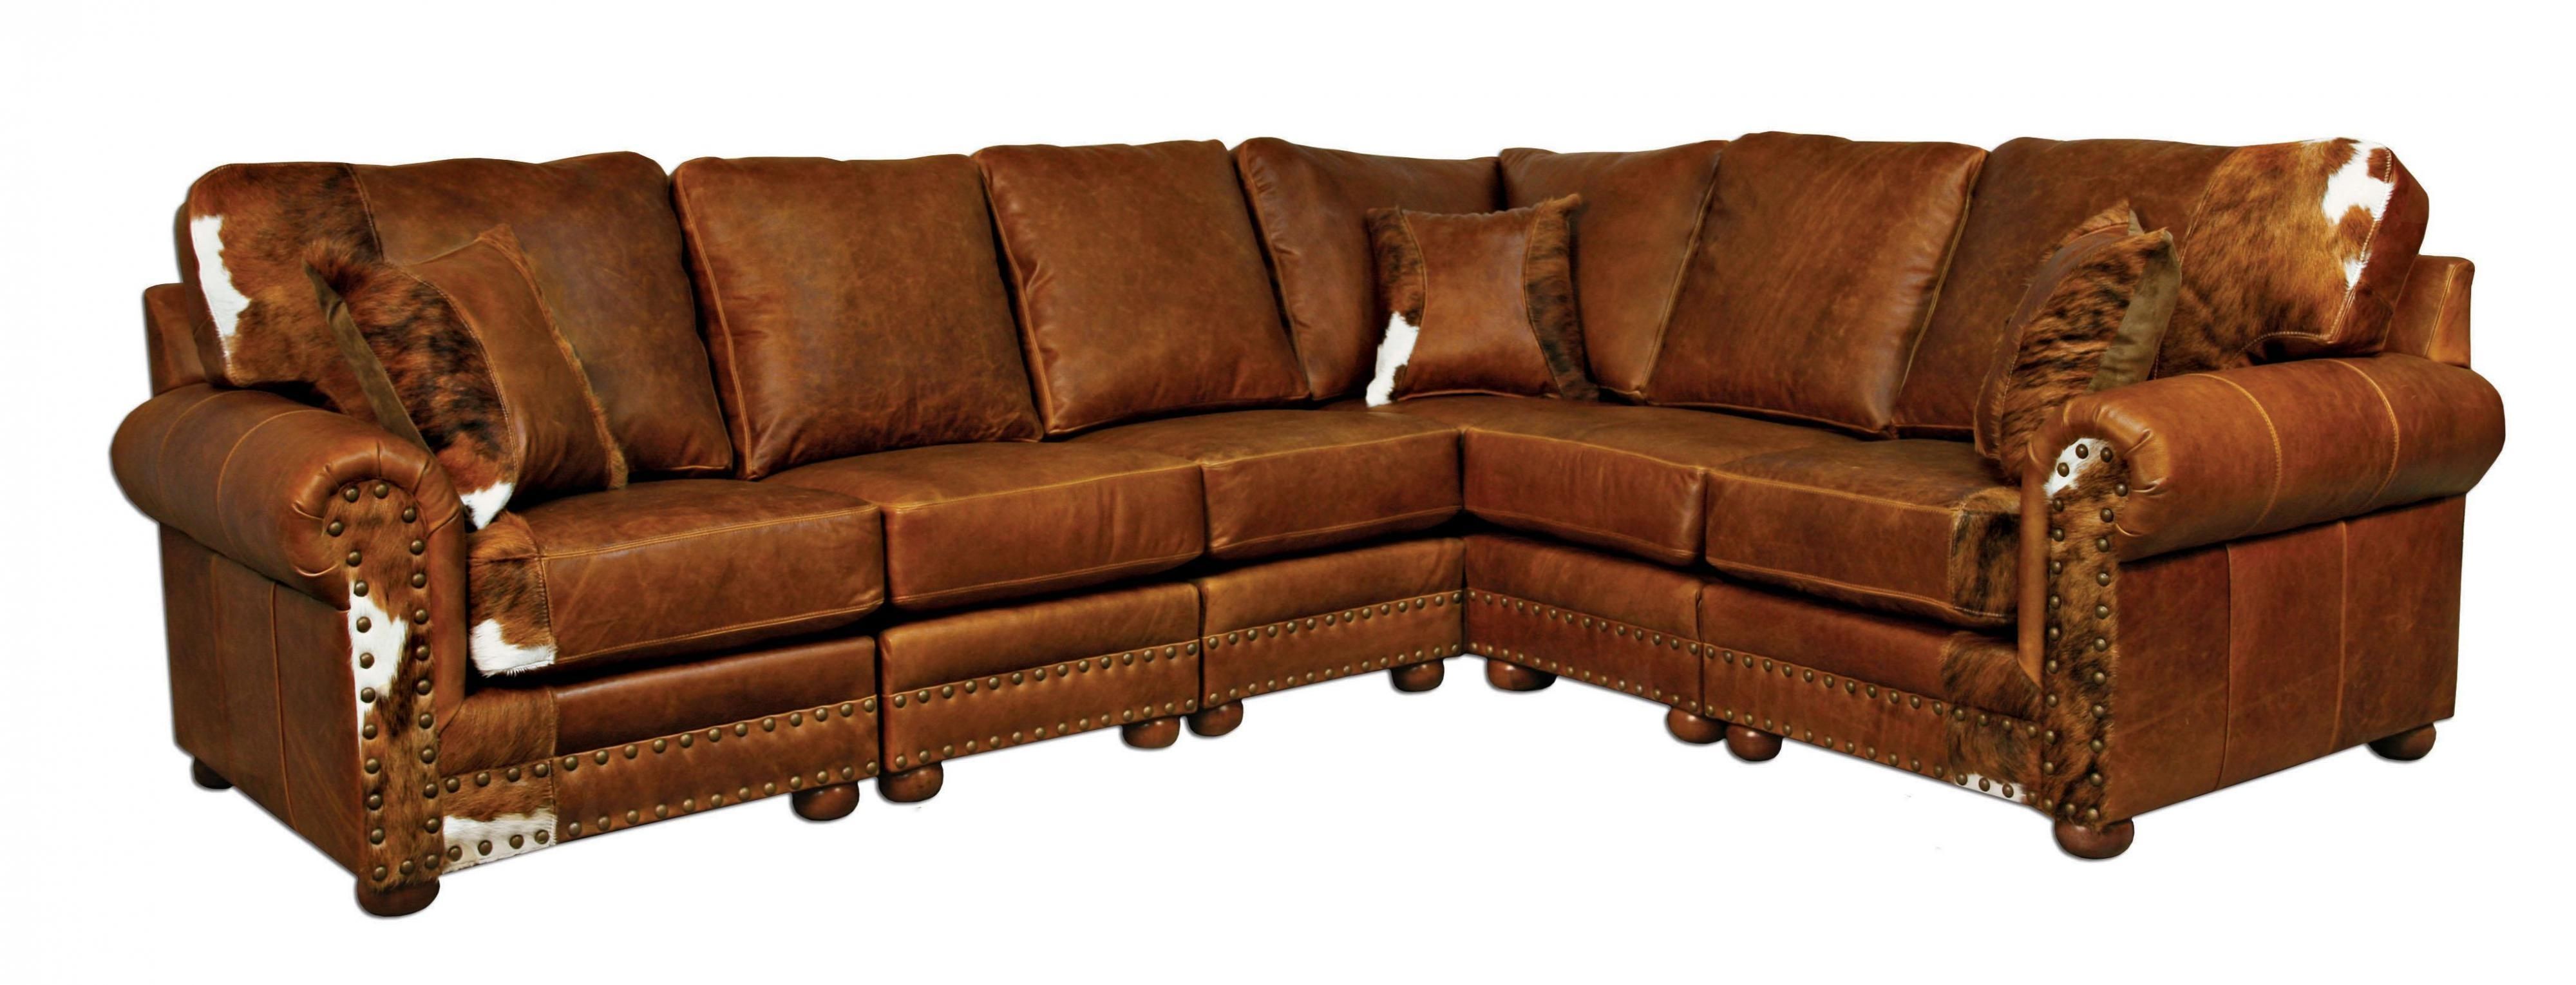 Sofas Center : Formalather Sofa Clairsville Western Style Sets For Western Style Sectional Sofas (View 6 of 20)